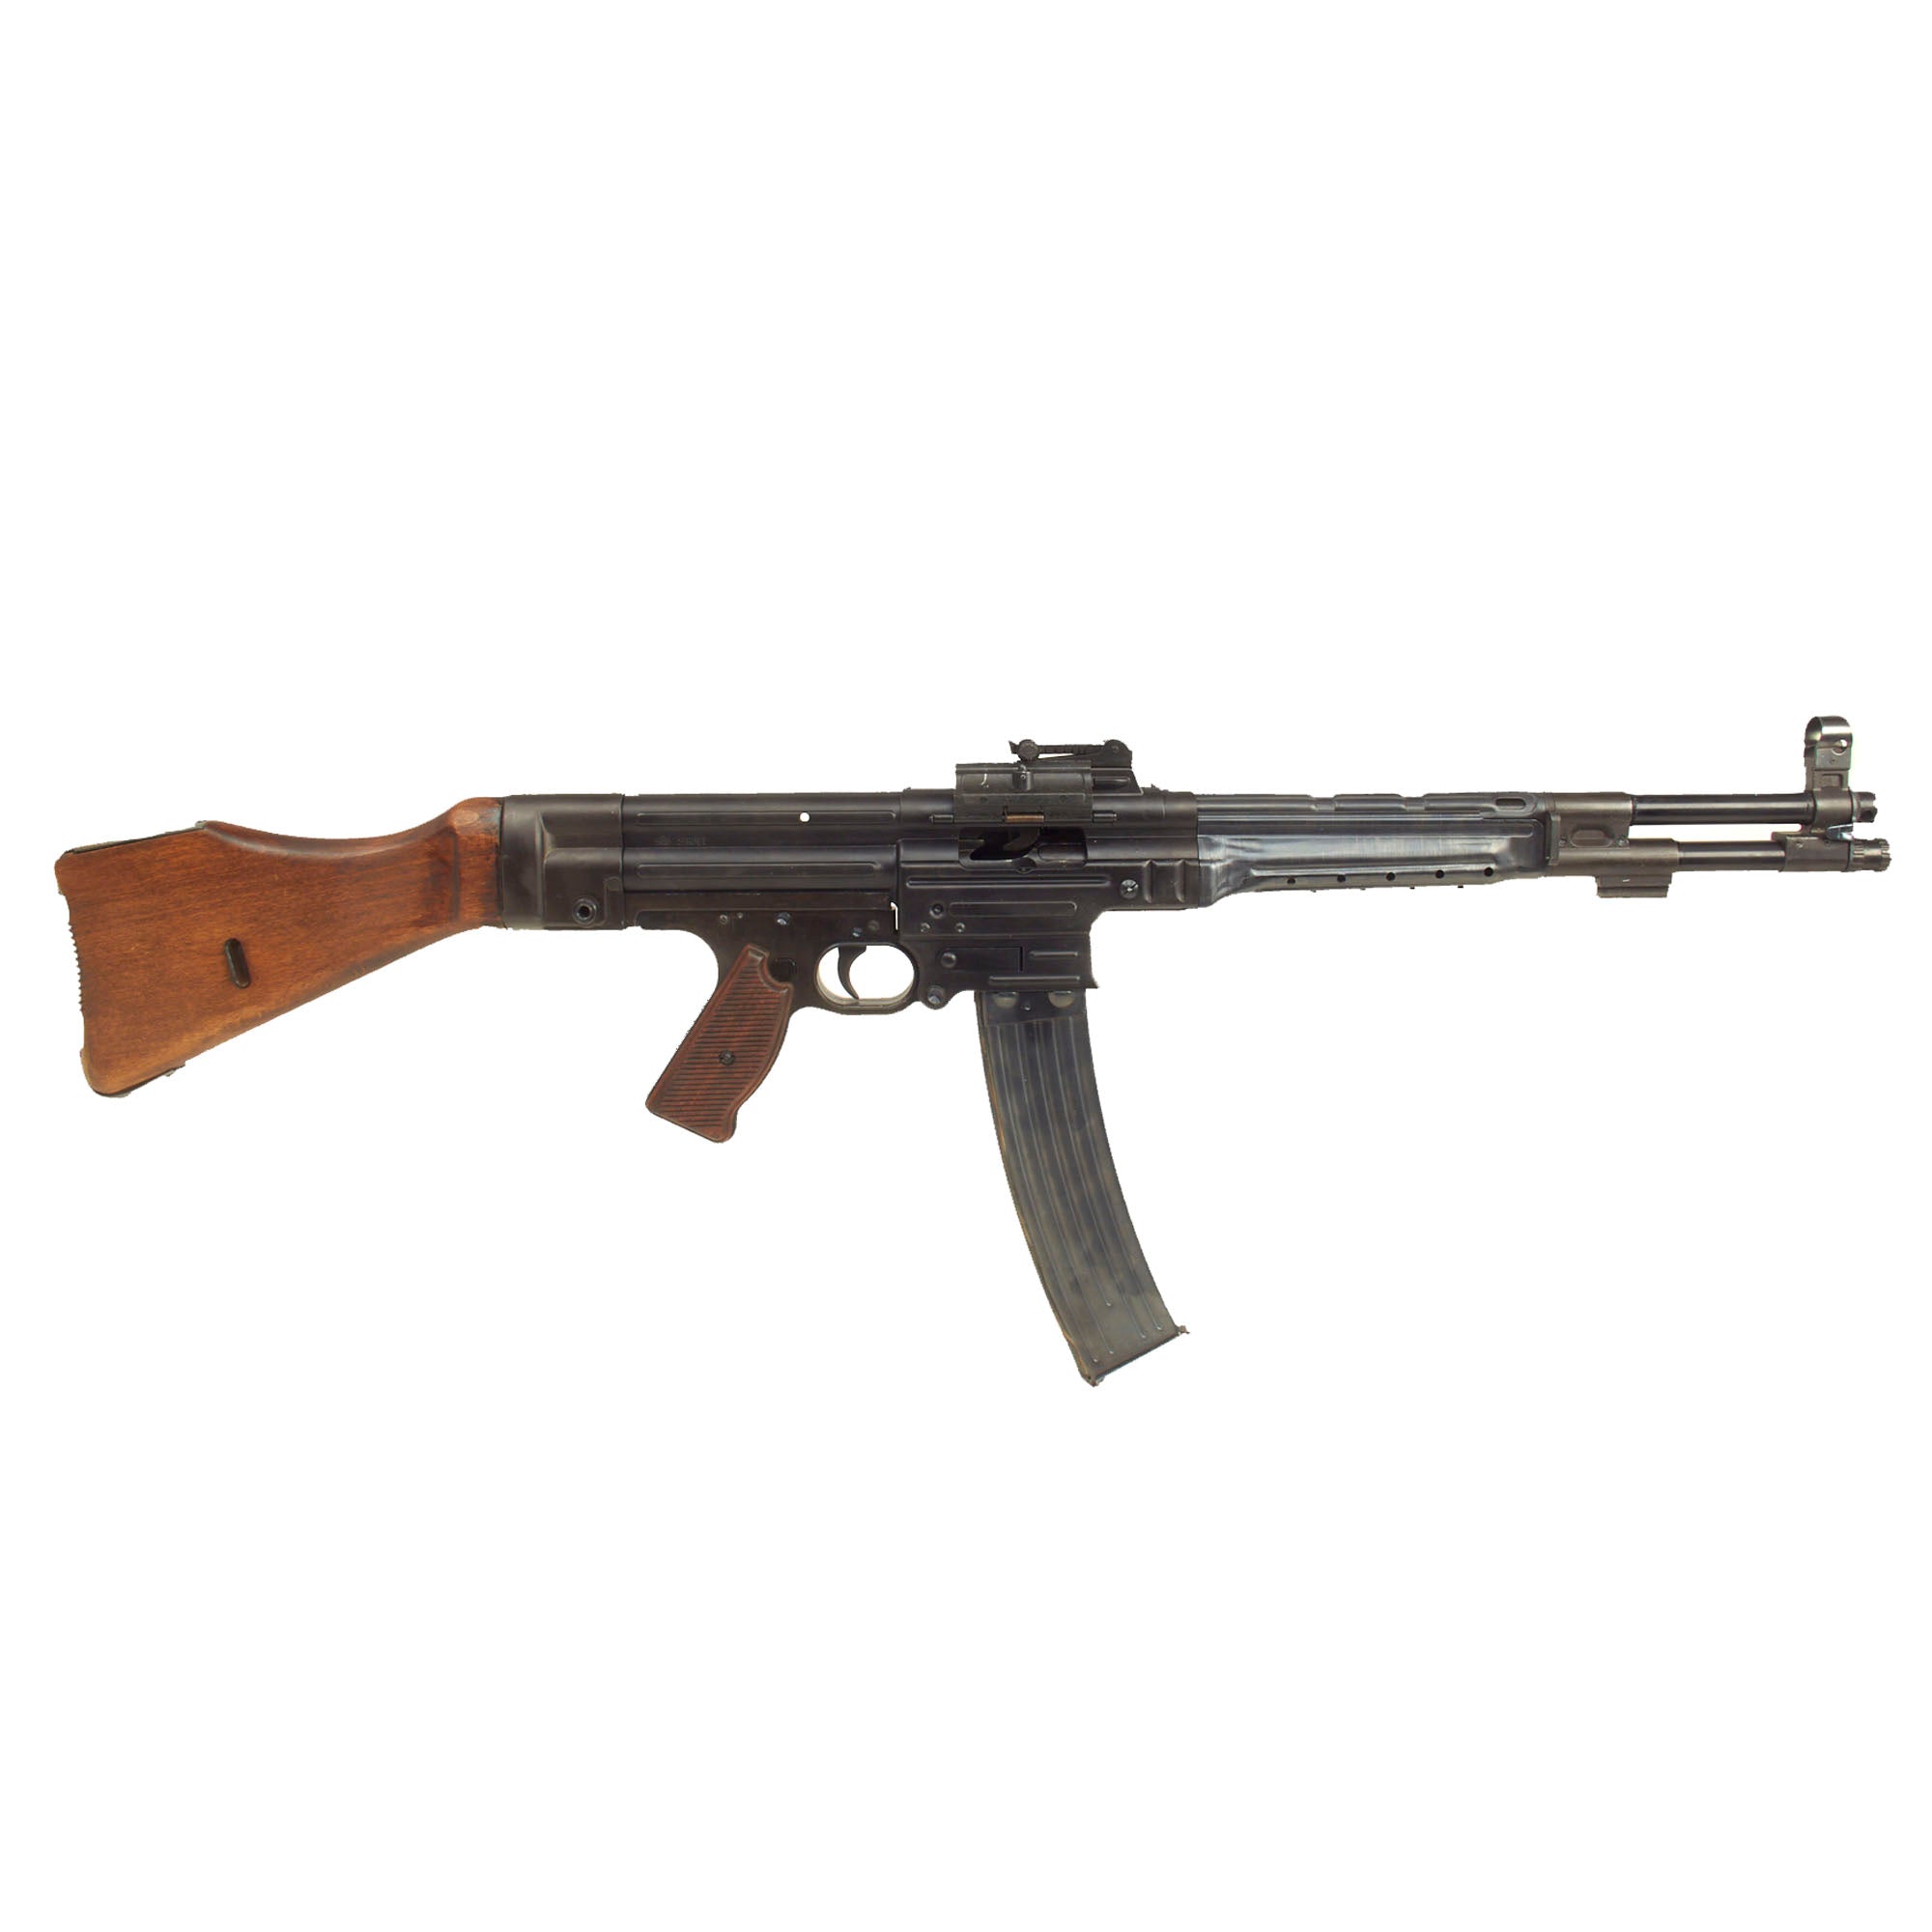 SERVICE WEAPONS, GERMANY UNTIL 1945, machine carbine model 42H (MKb 42(H)),  calibre 8 x 33, number 6690, Editorial-Use-Only Stock Photo - Alamy